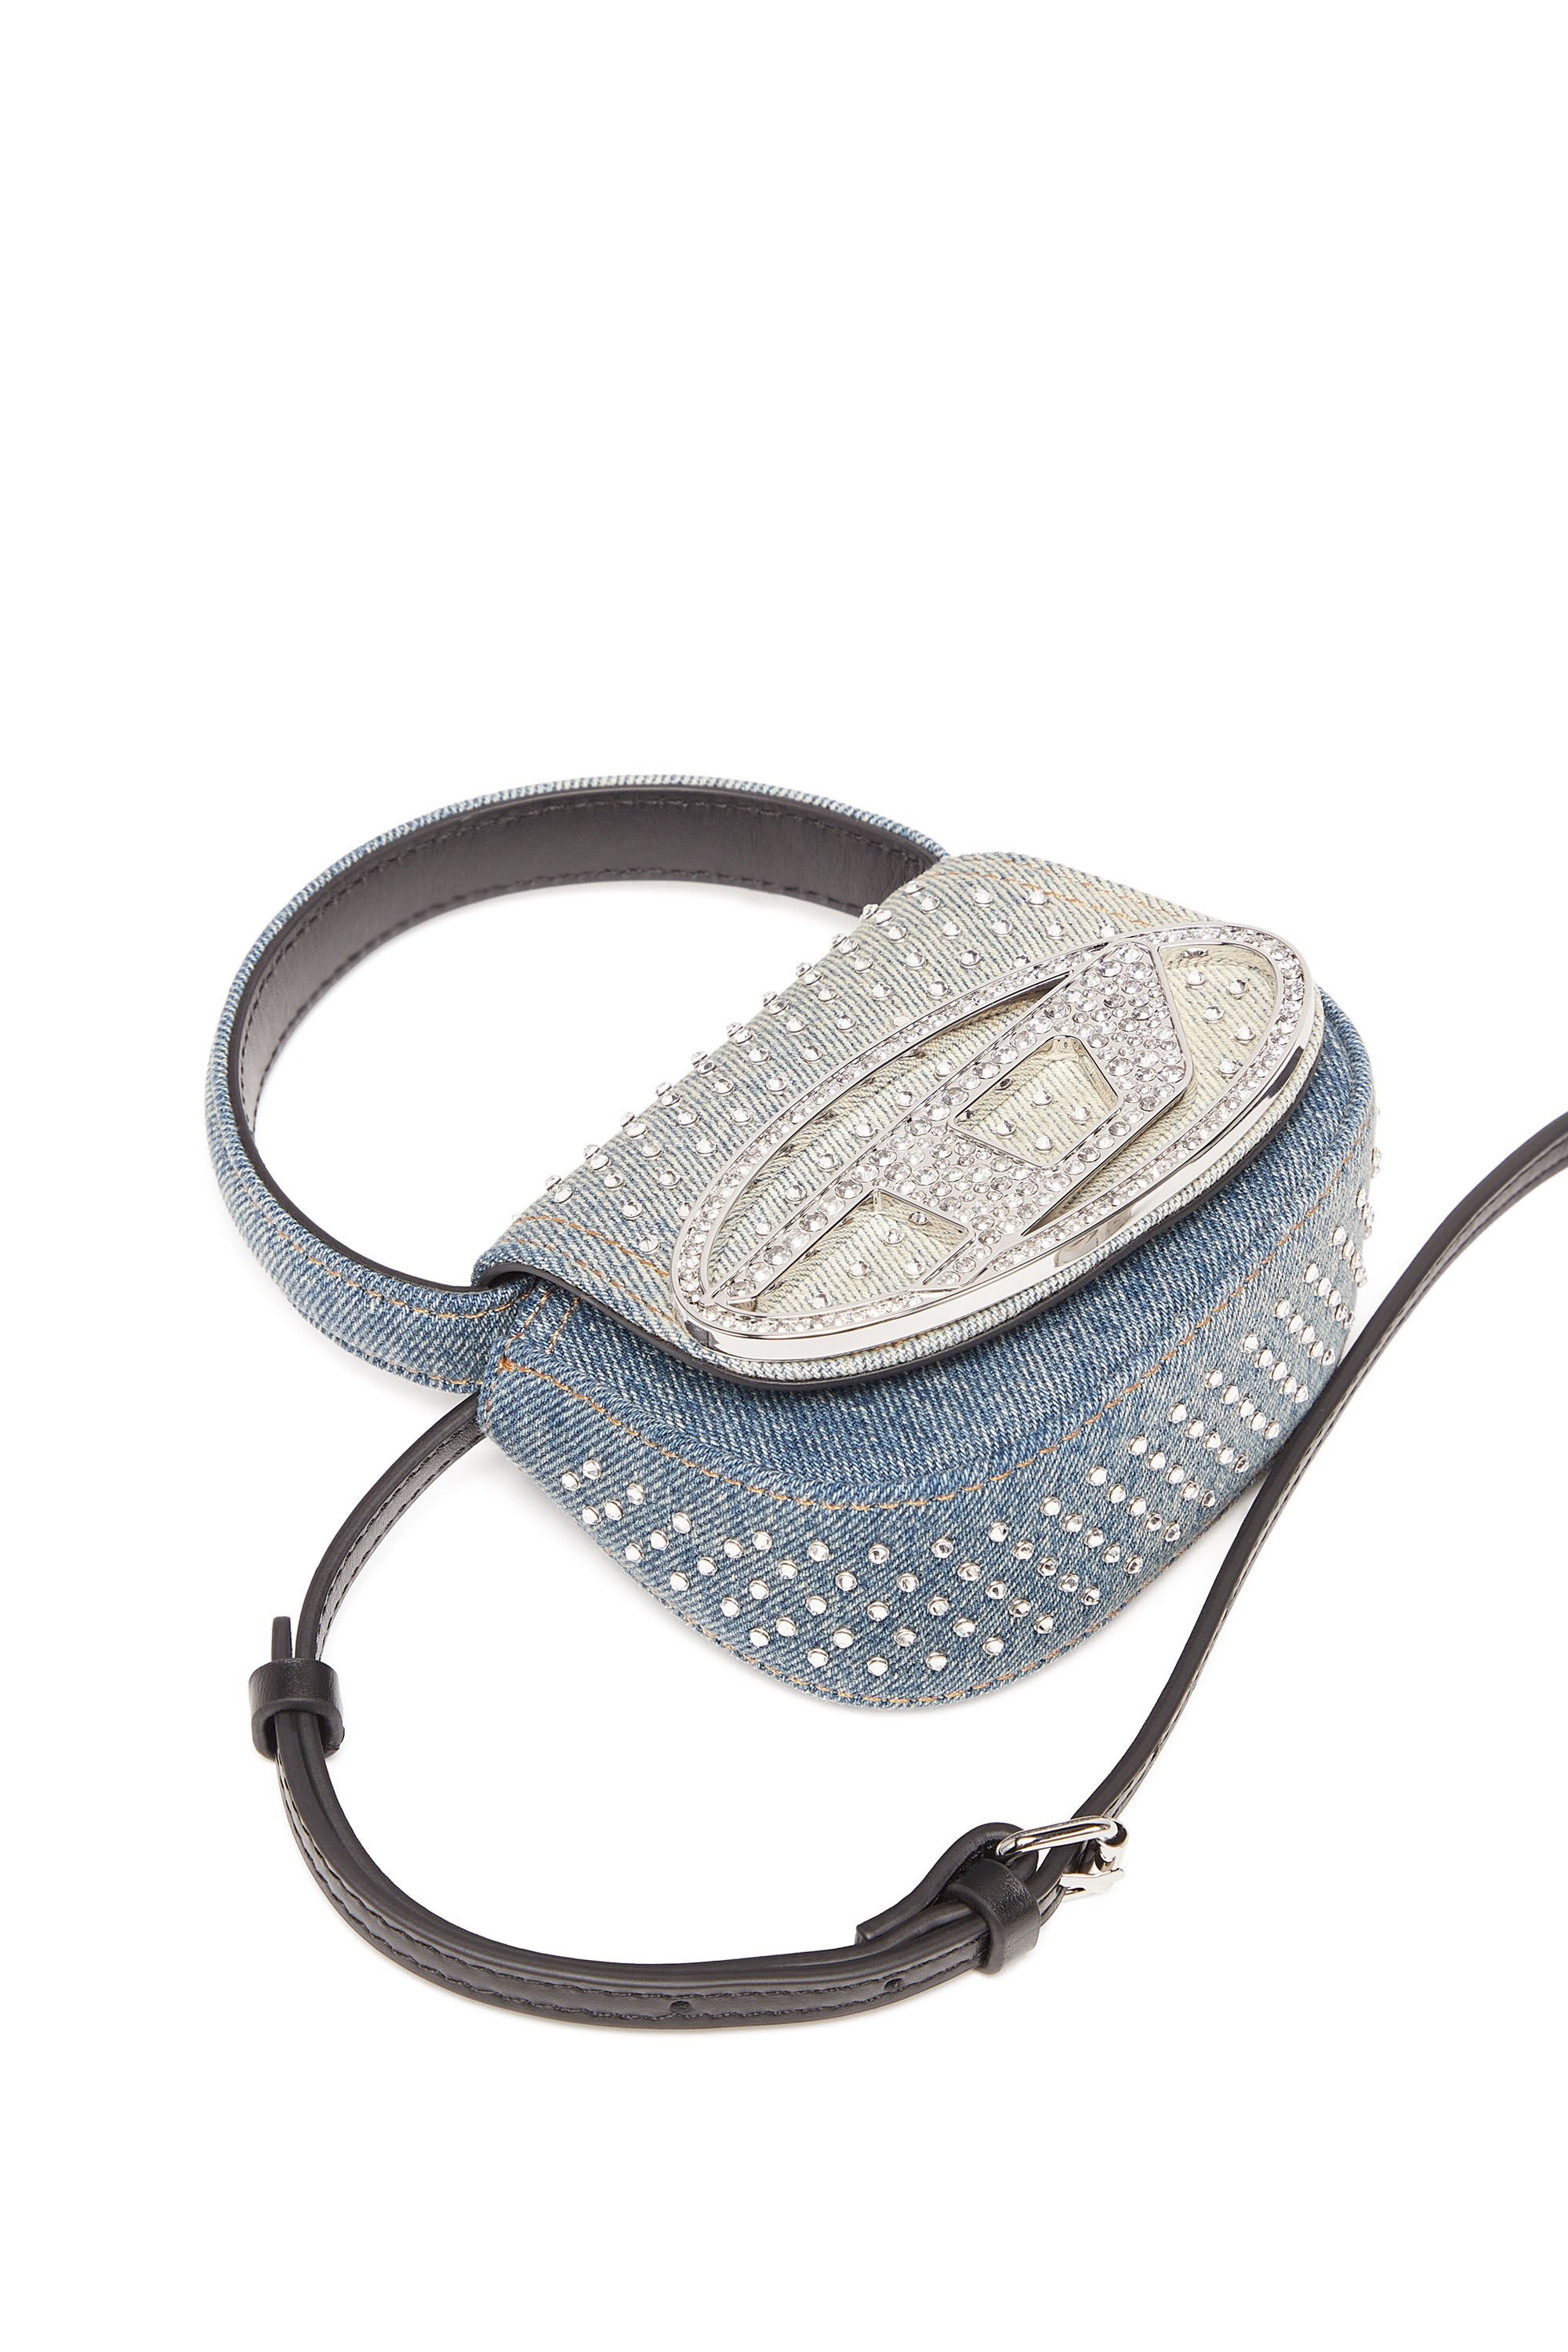 Women's 1DR XS - Iconic mini bag in denim and crystals | Blue | Diesel